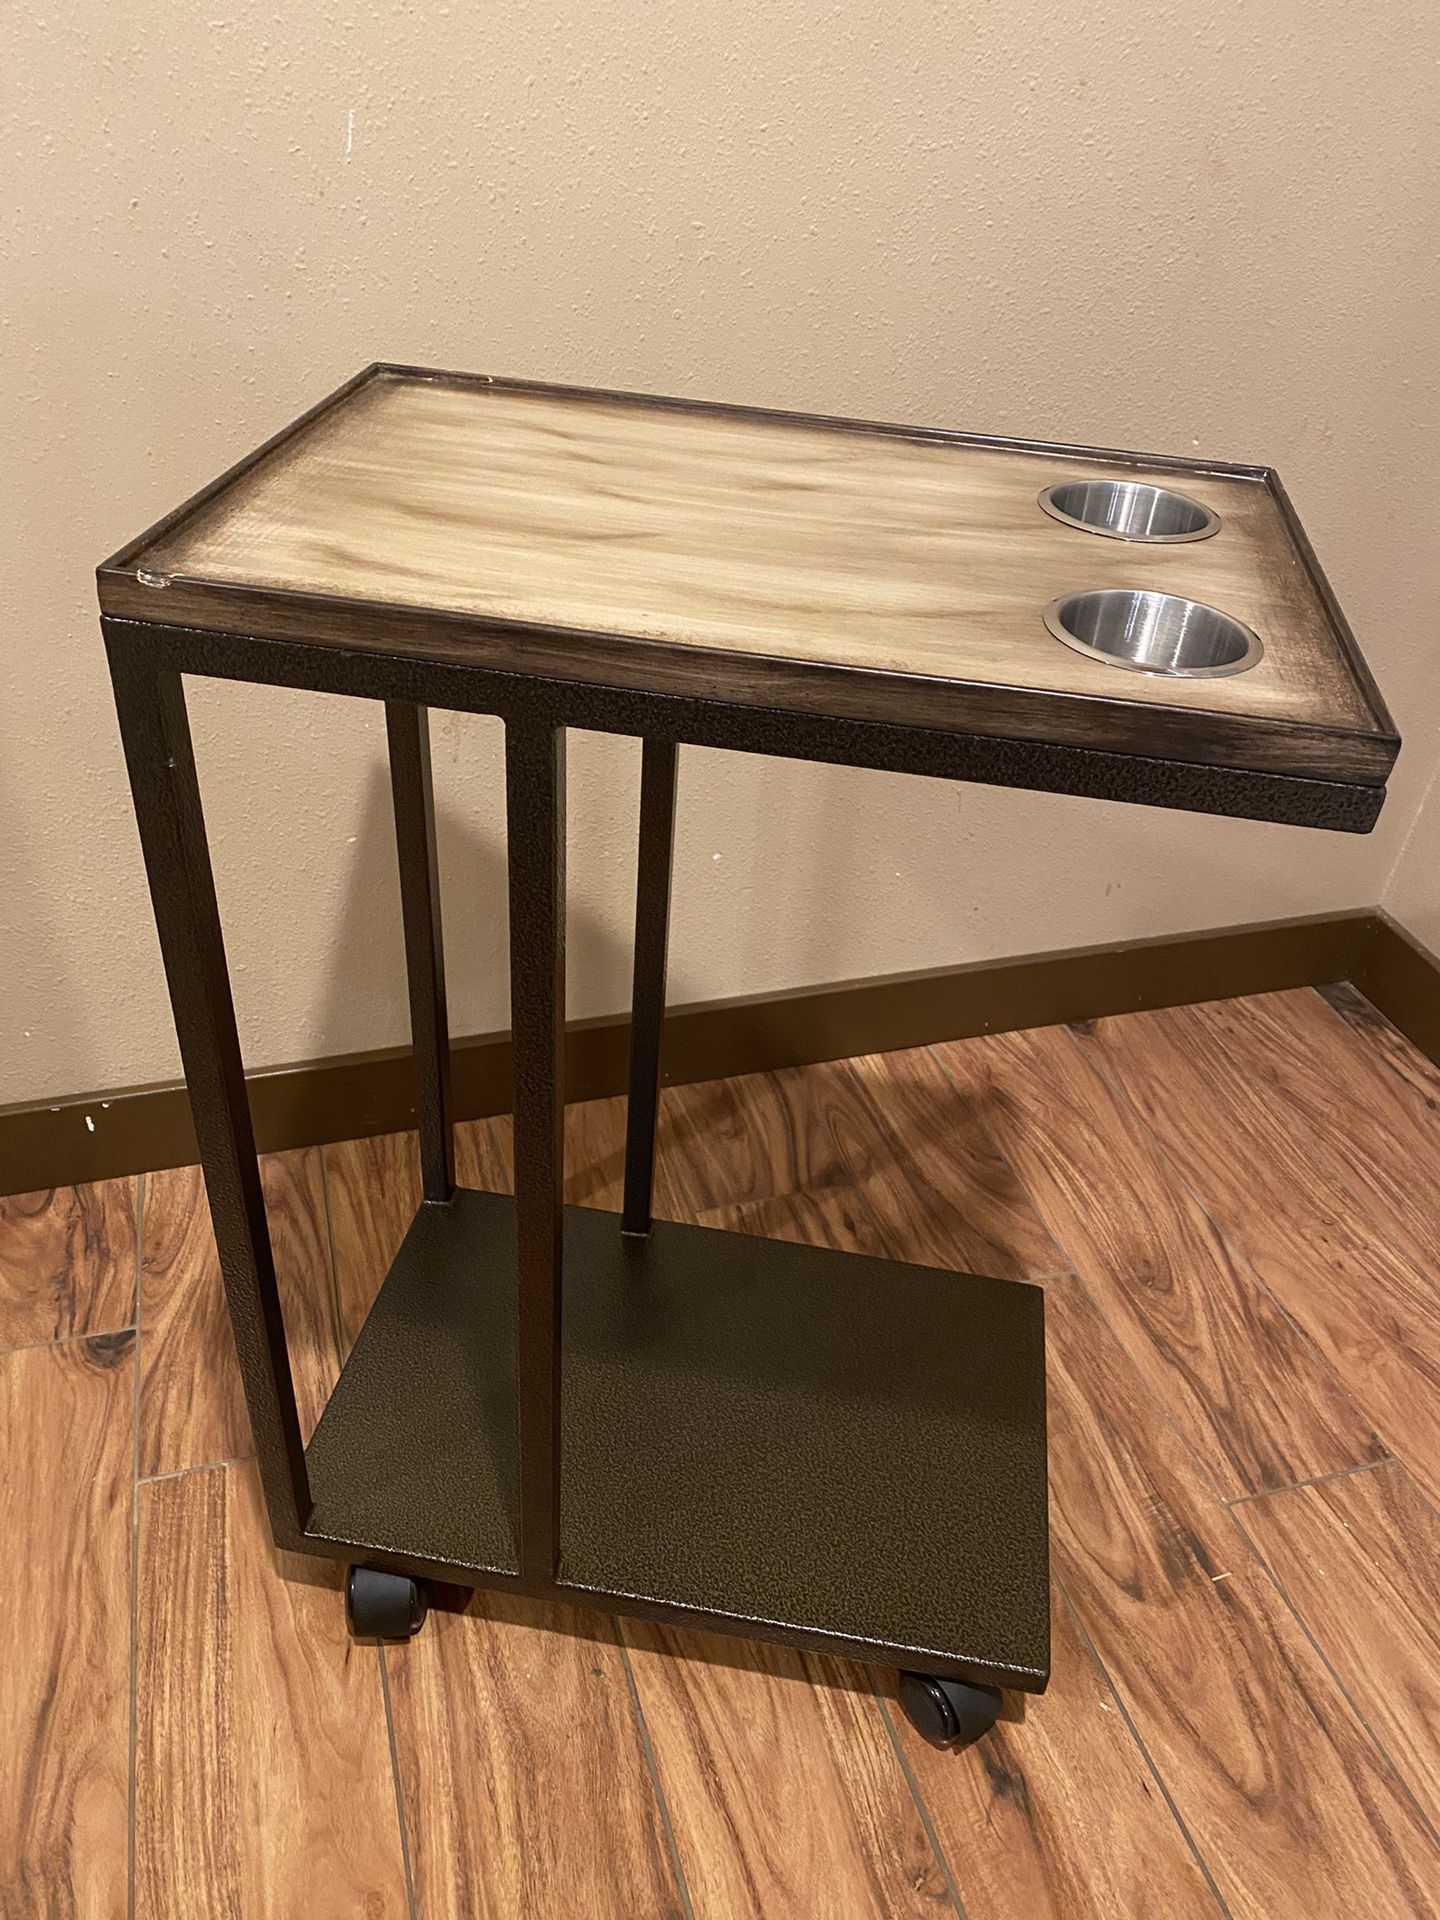 Beverage And Service Cart with Cut Outs for Cup Holders. The casters make it easy to roll to wherever you would like. Durable metal base. 28”H - 12”W 